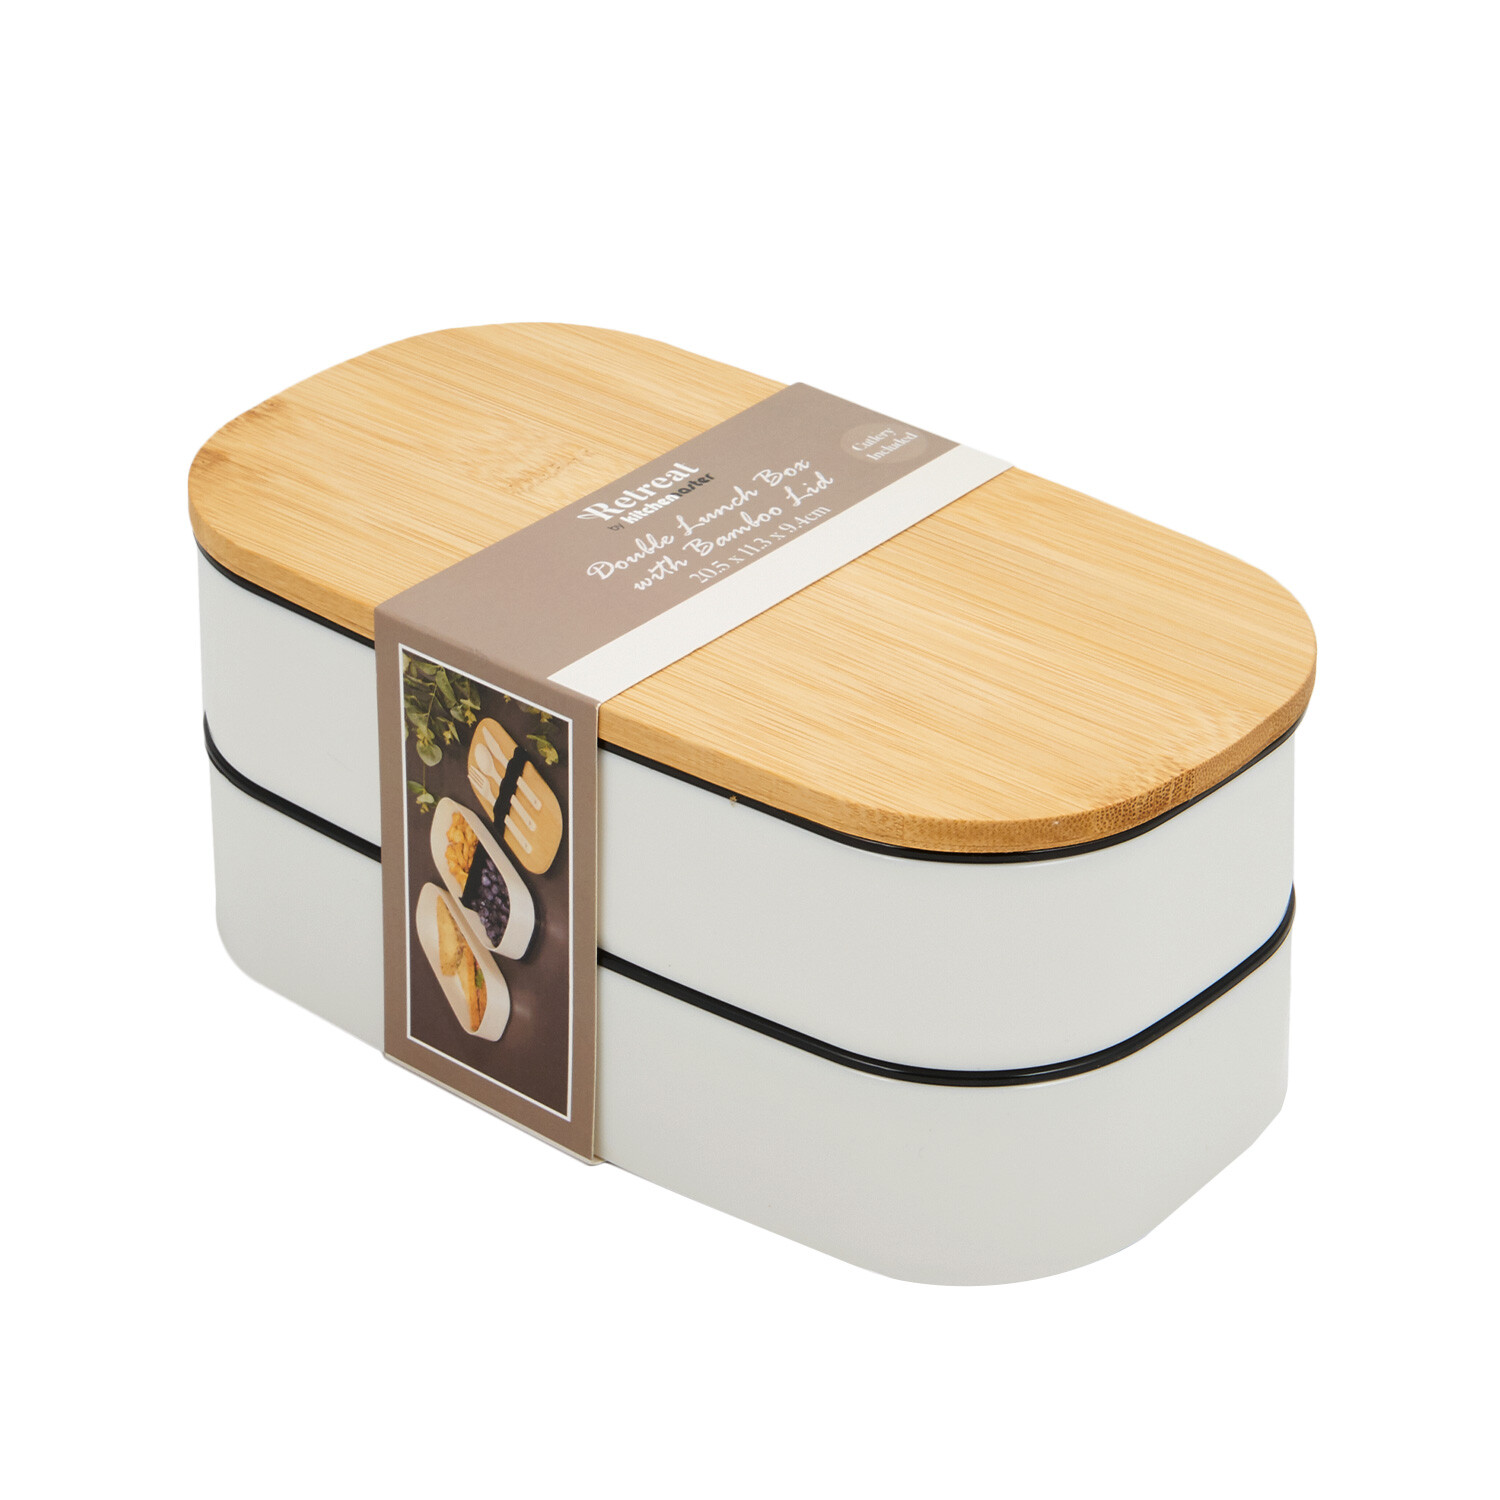 Double Lunch Box with Bamboo Lid - White Image 1